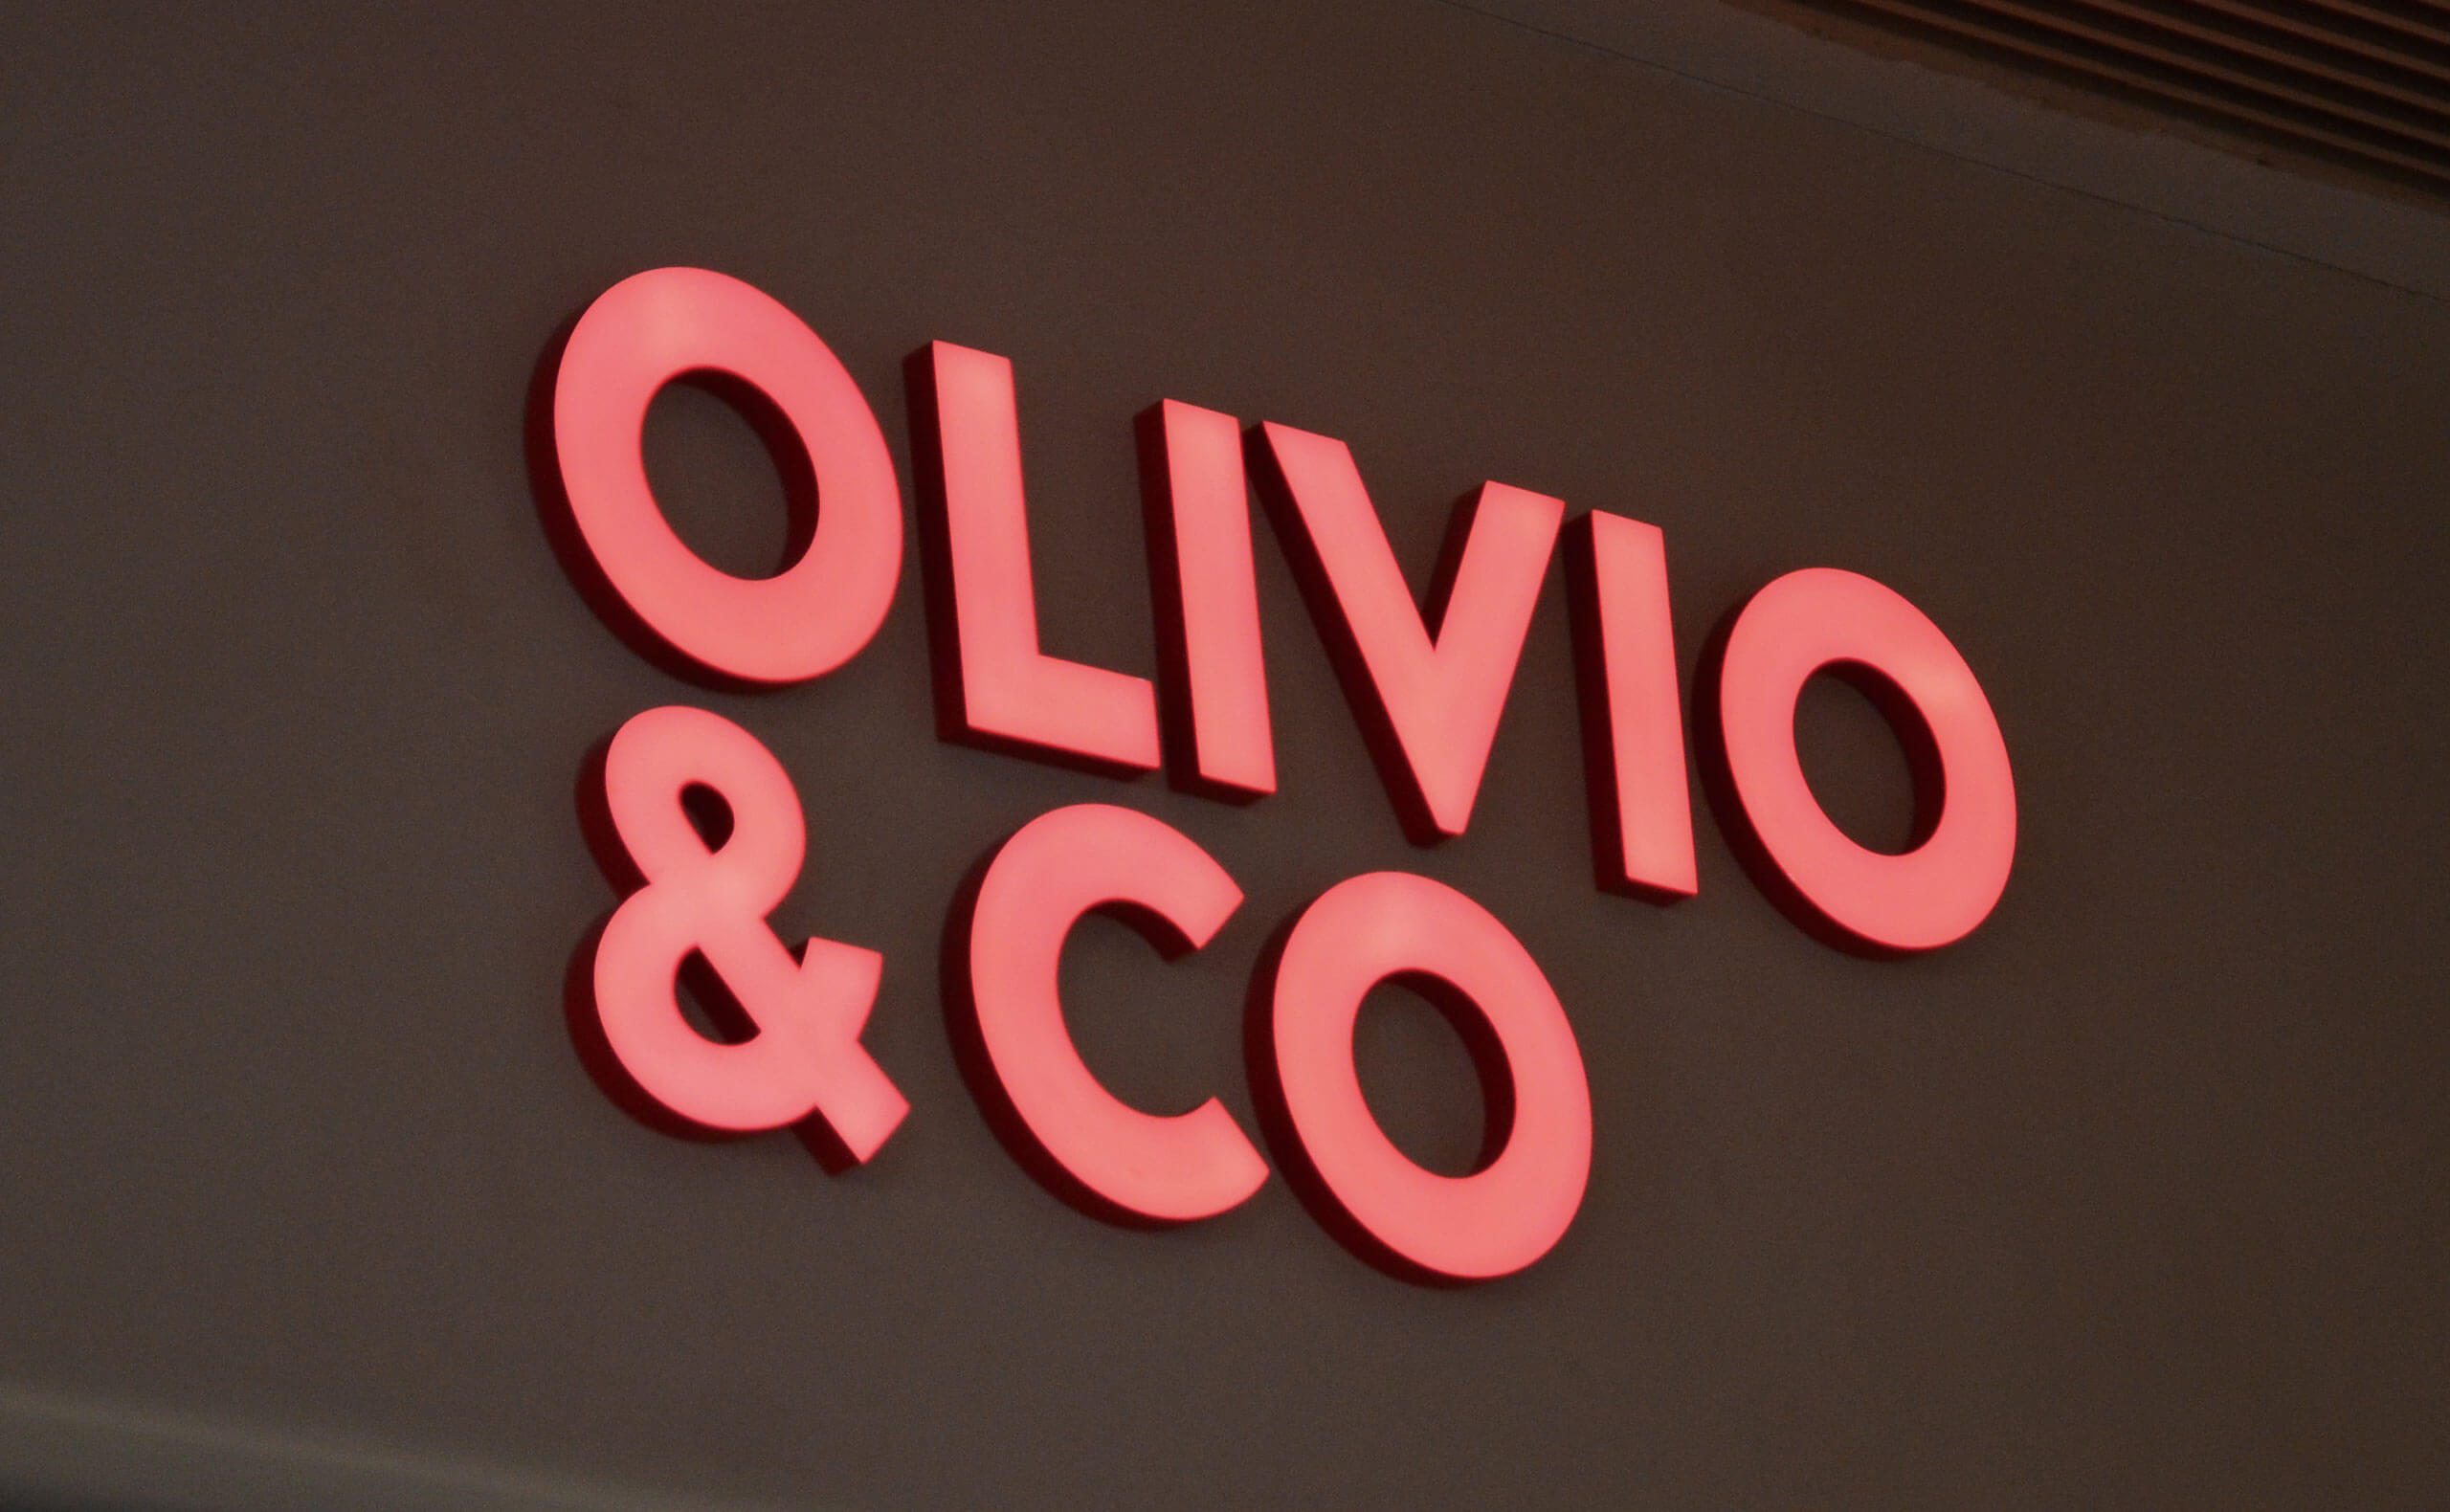 Epoxy Resin Front Lit Channel Letters for Olivio & Co